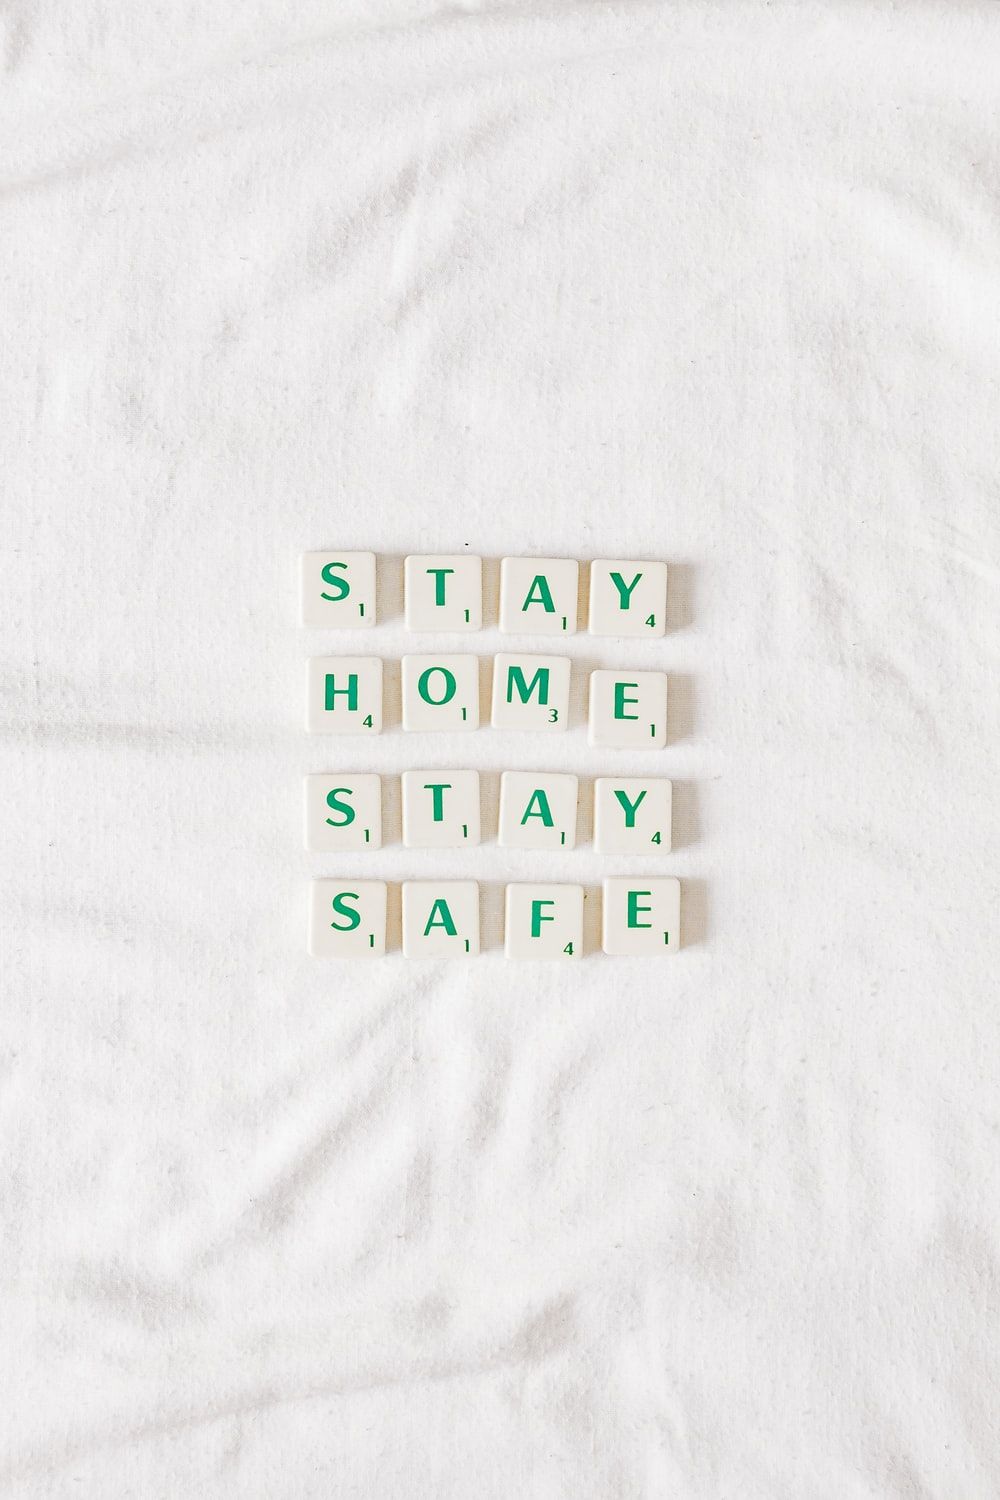 Stay Home Stay Safe Picture. Download Free Image